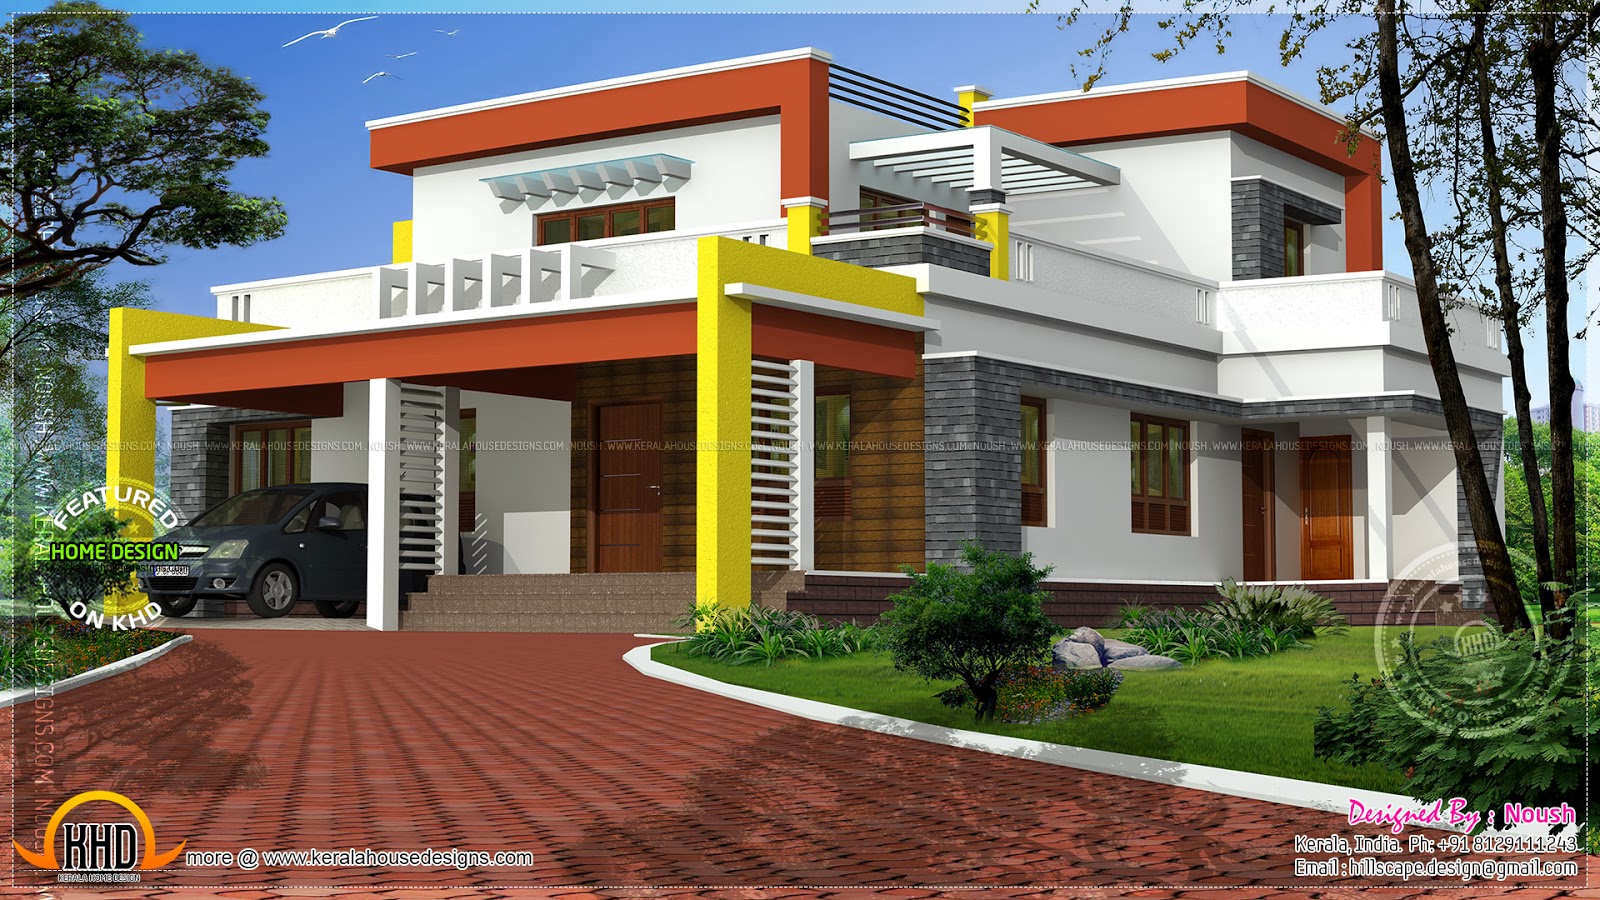 227 square meter contemporary view - Kerala Home Design and Floor Plans ...